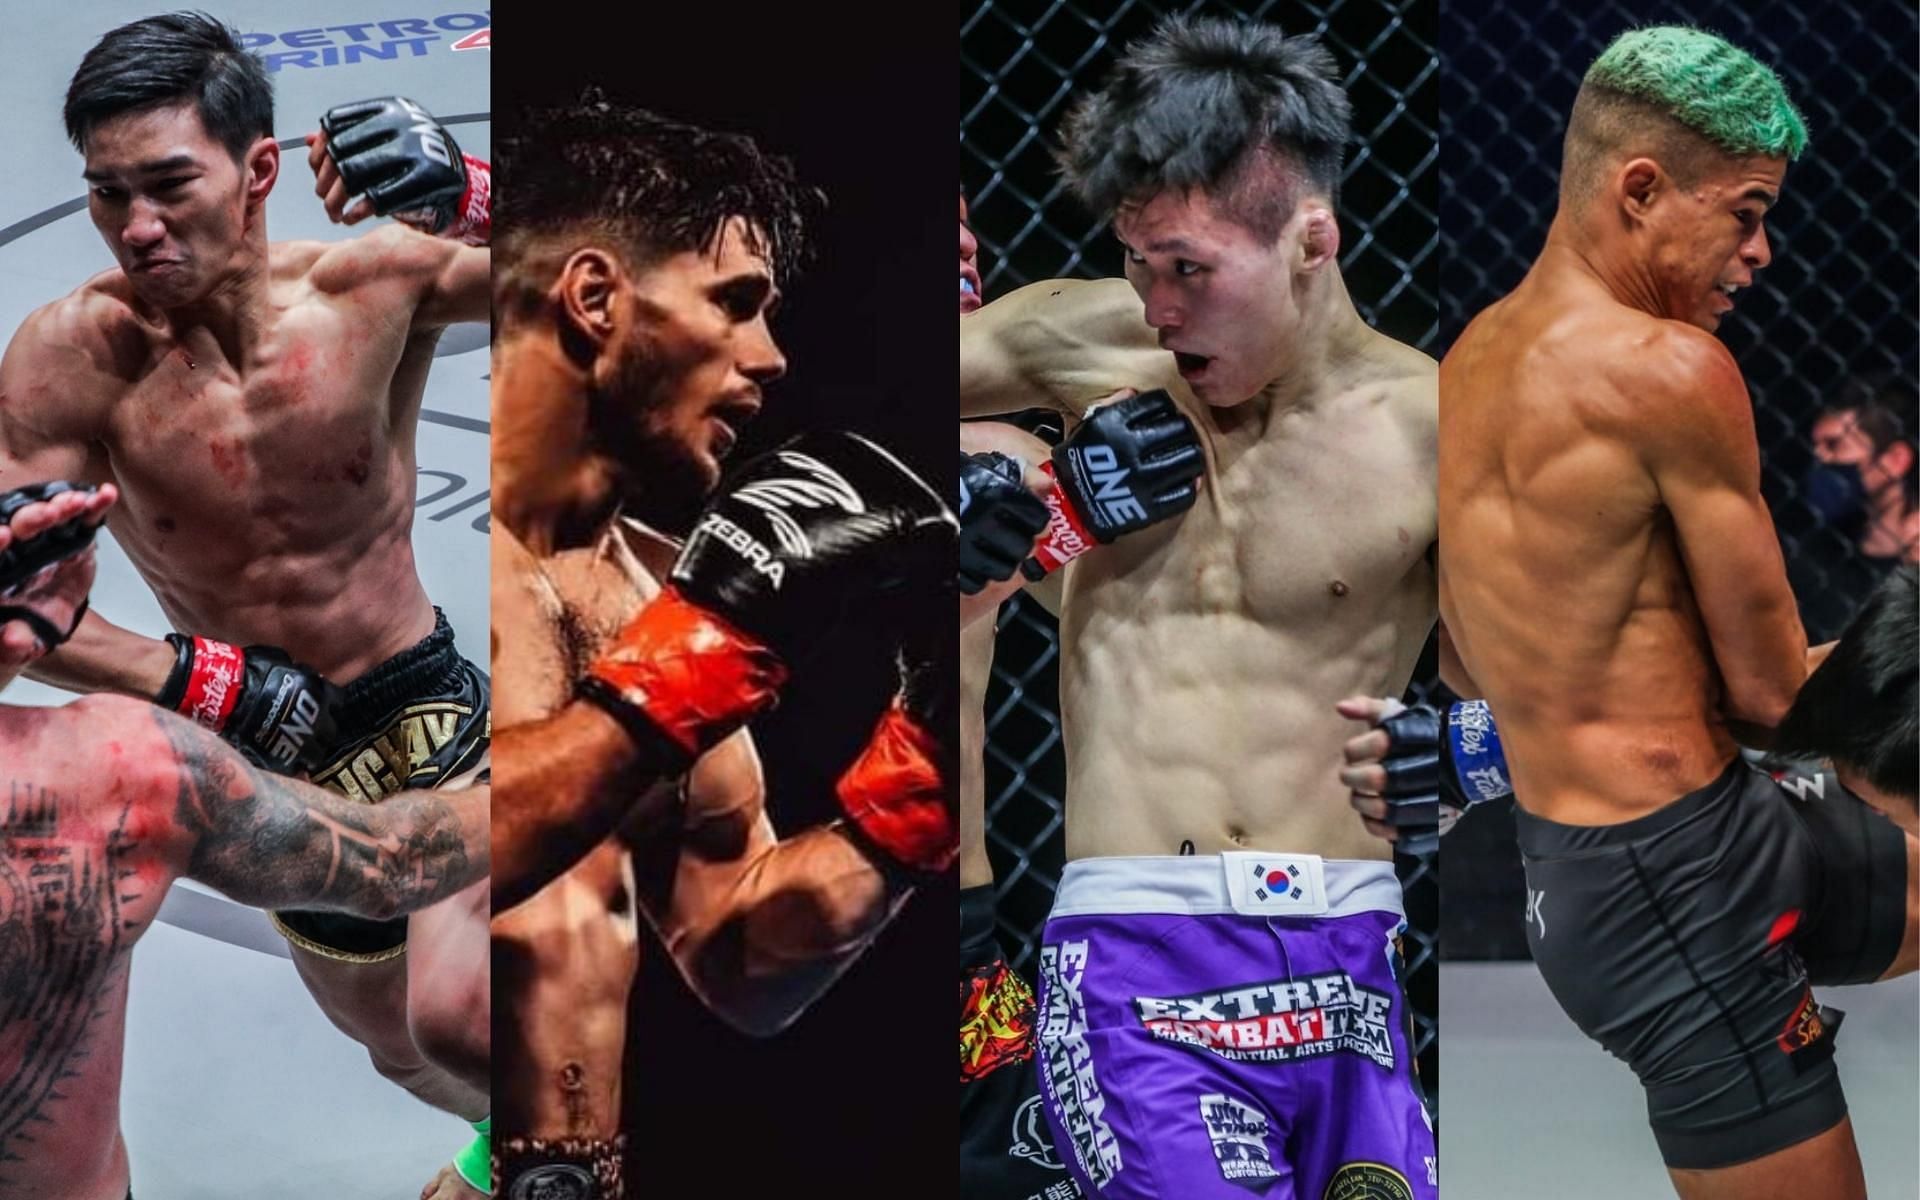 The ONE Championship fight card at ONE 158 is going to be explosive. (Images courtesy: ONE Championship, @niclasrlarsen on Instagram)